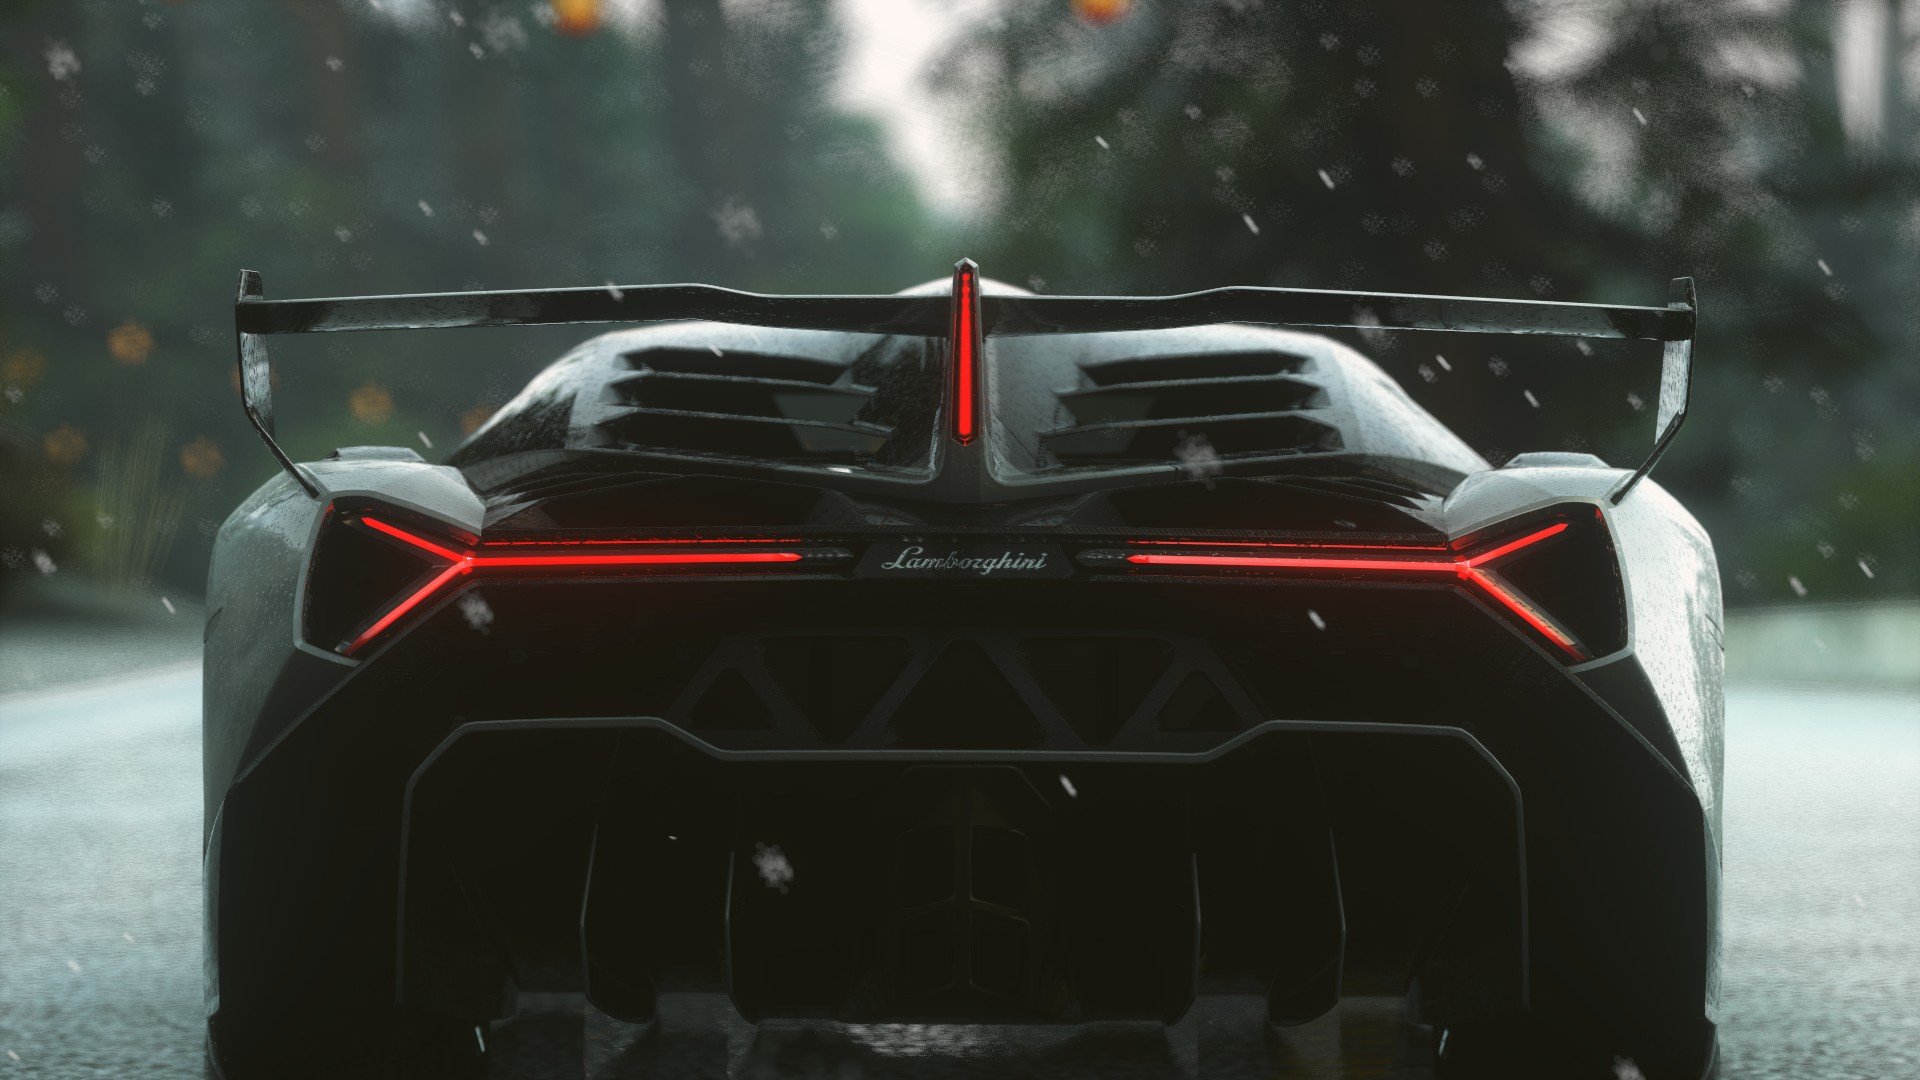 Wallpapers Of Car Games